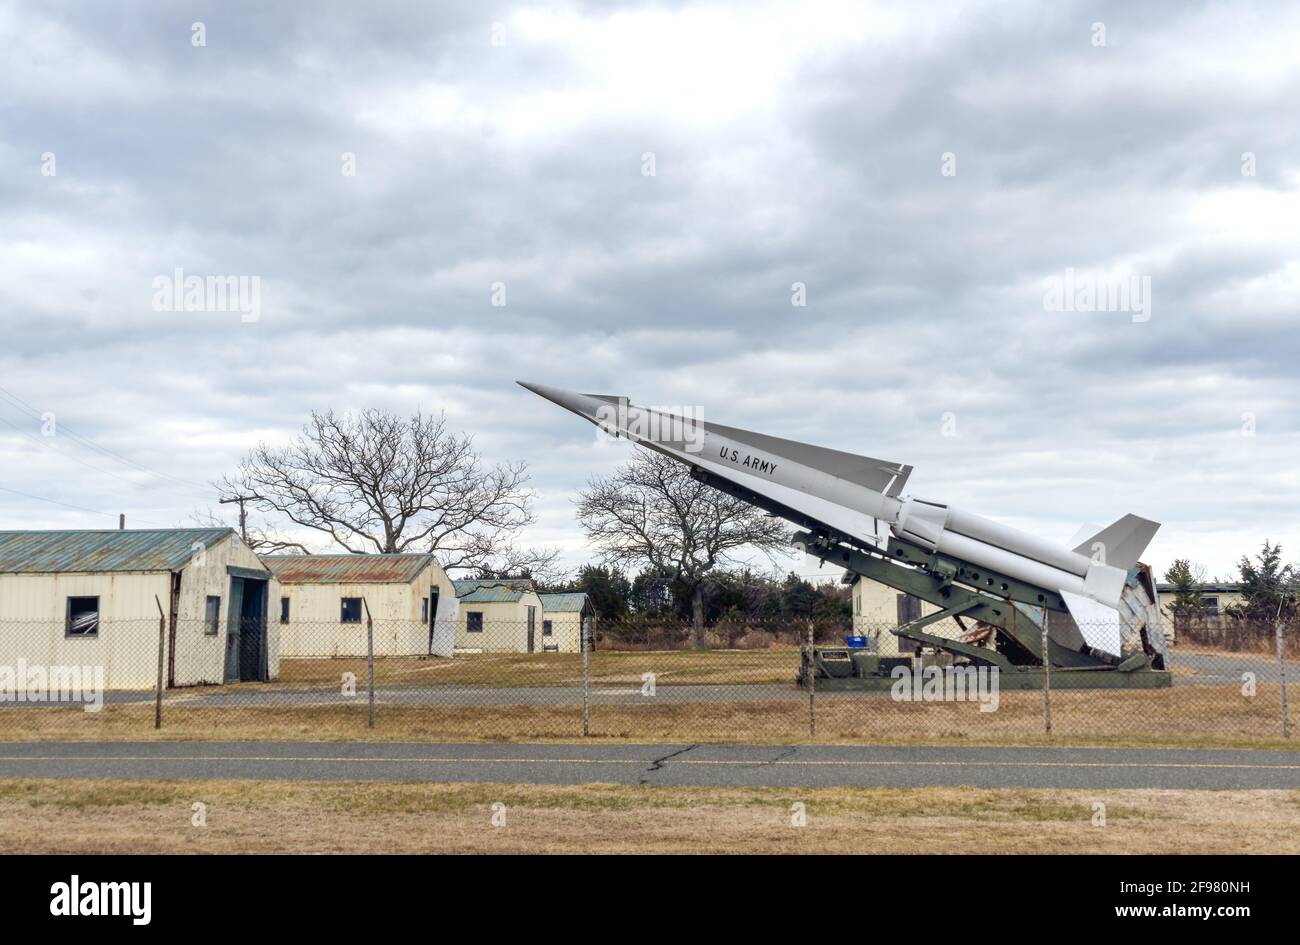 Sandy Hook, NJ - USA - Jan 17, 2021: View of a MIM-4 Nike Hercules missile located at Fort Hancock's Nike Site NY-56. Now part of Gateway National Rec Stock Photo